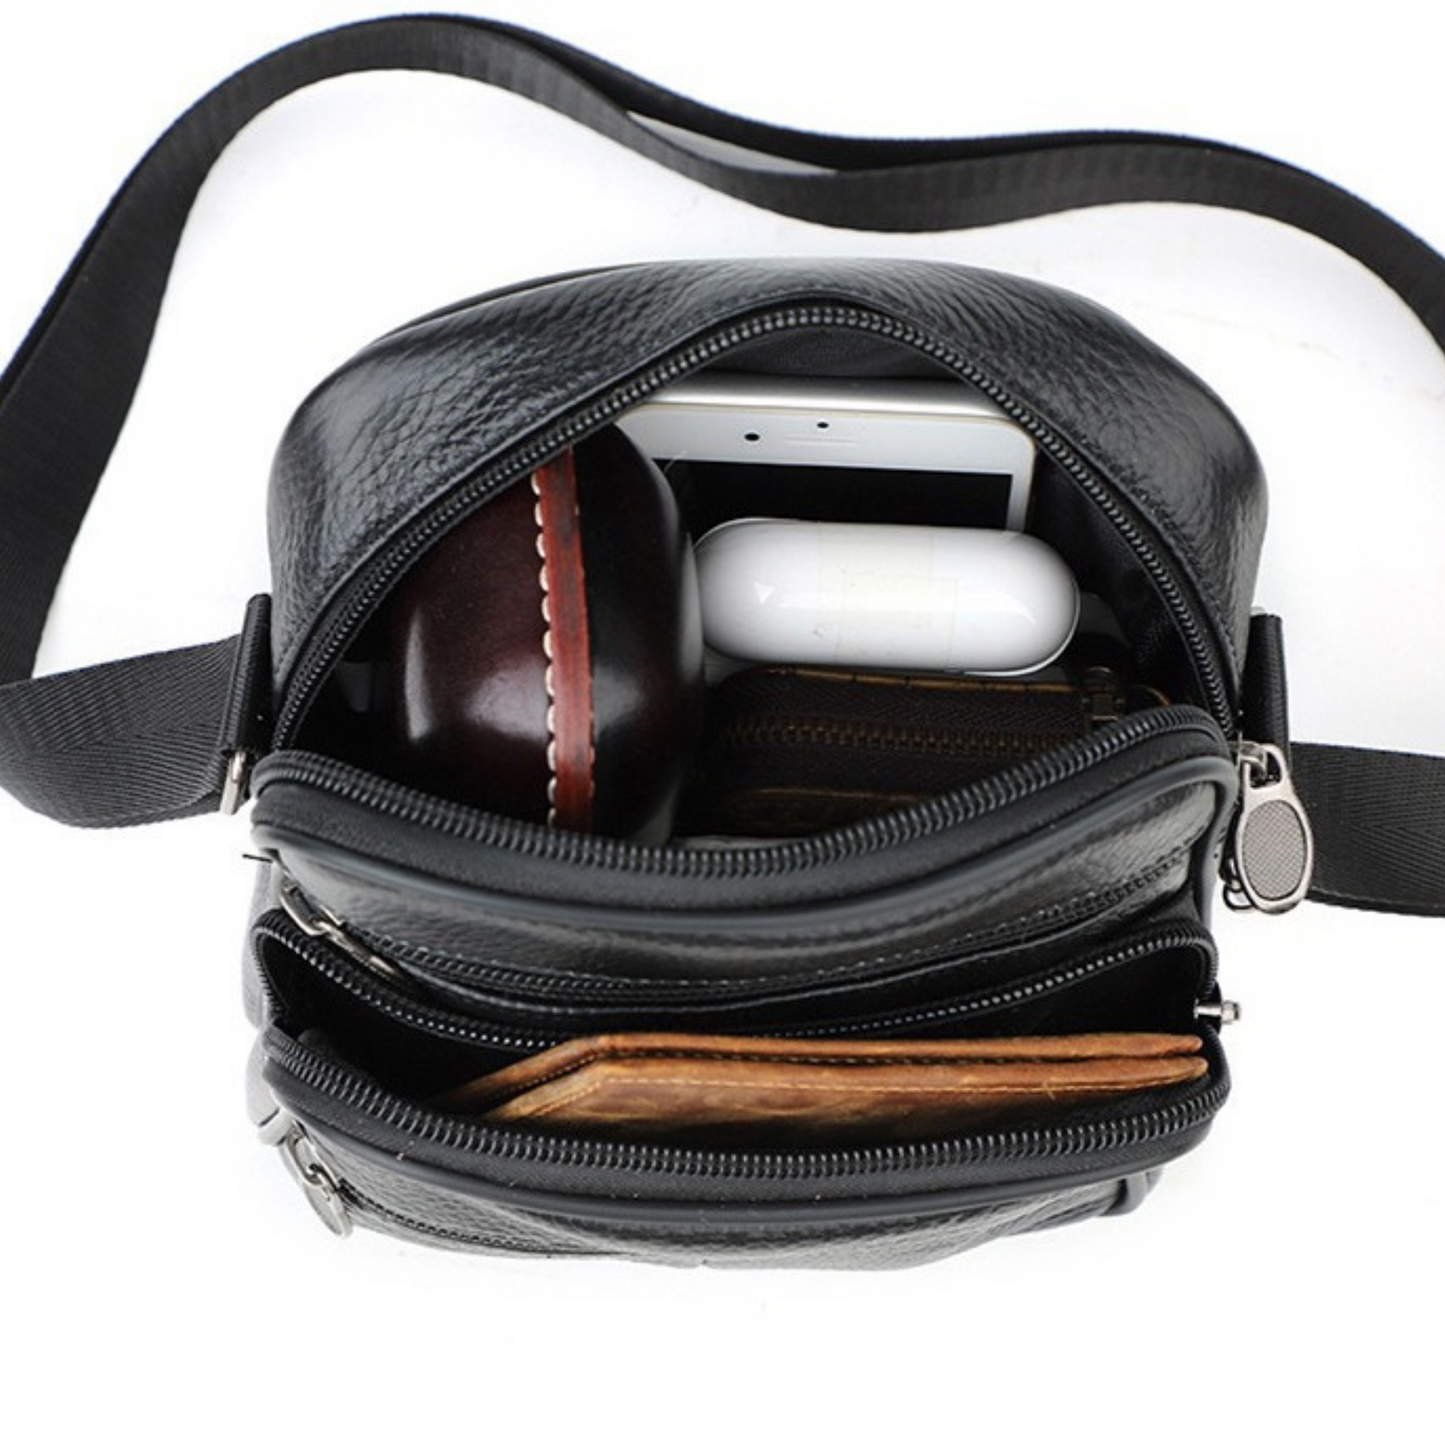 Mens Womens Small Compact Genuine Leather Cross Body Shoulder Bag